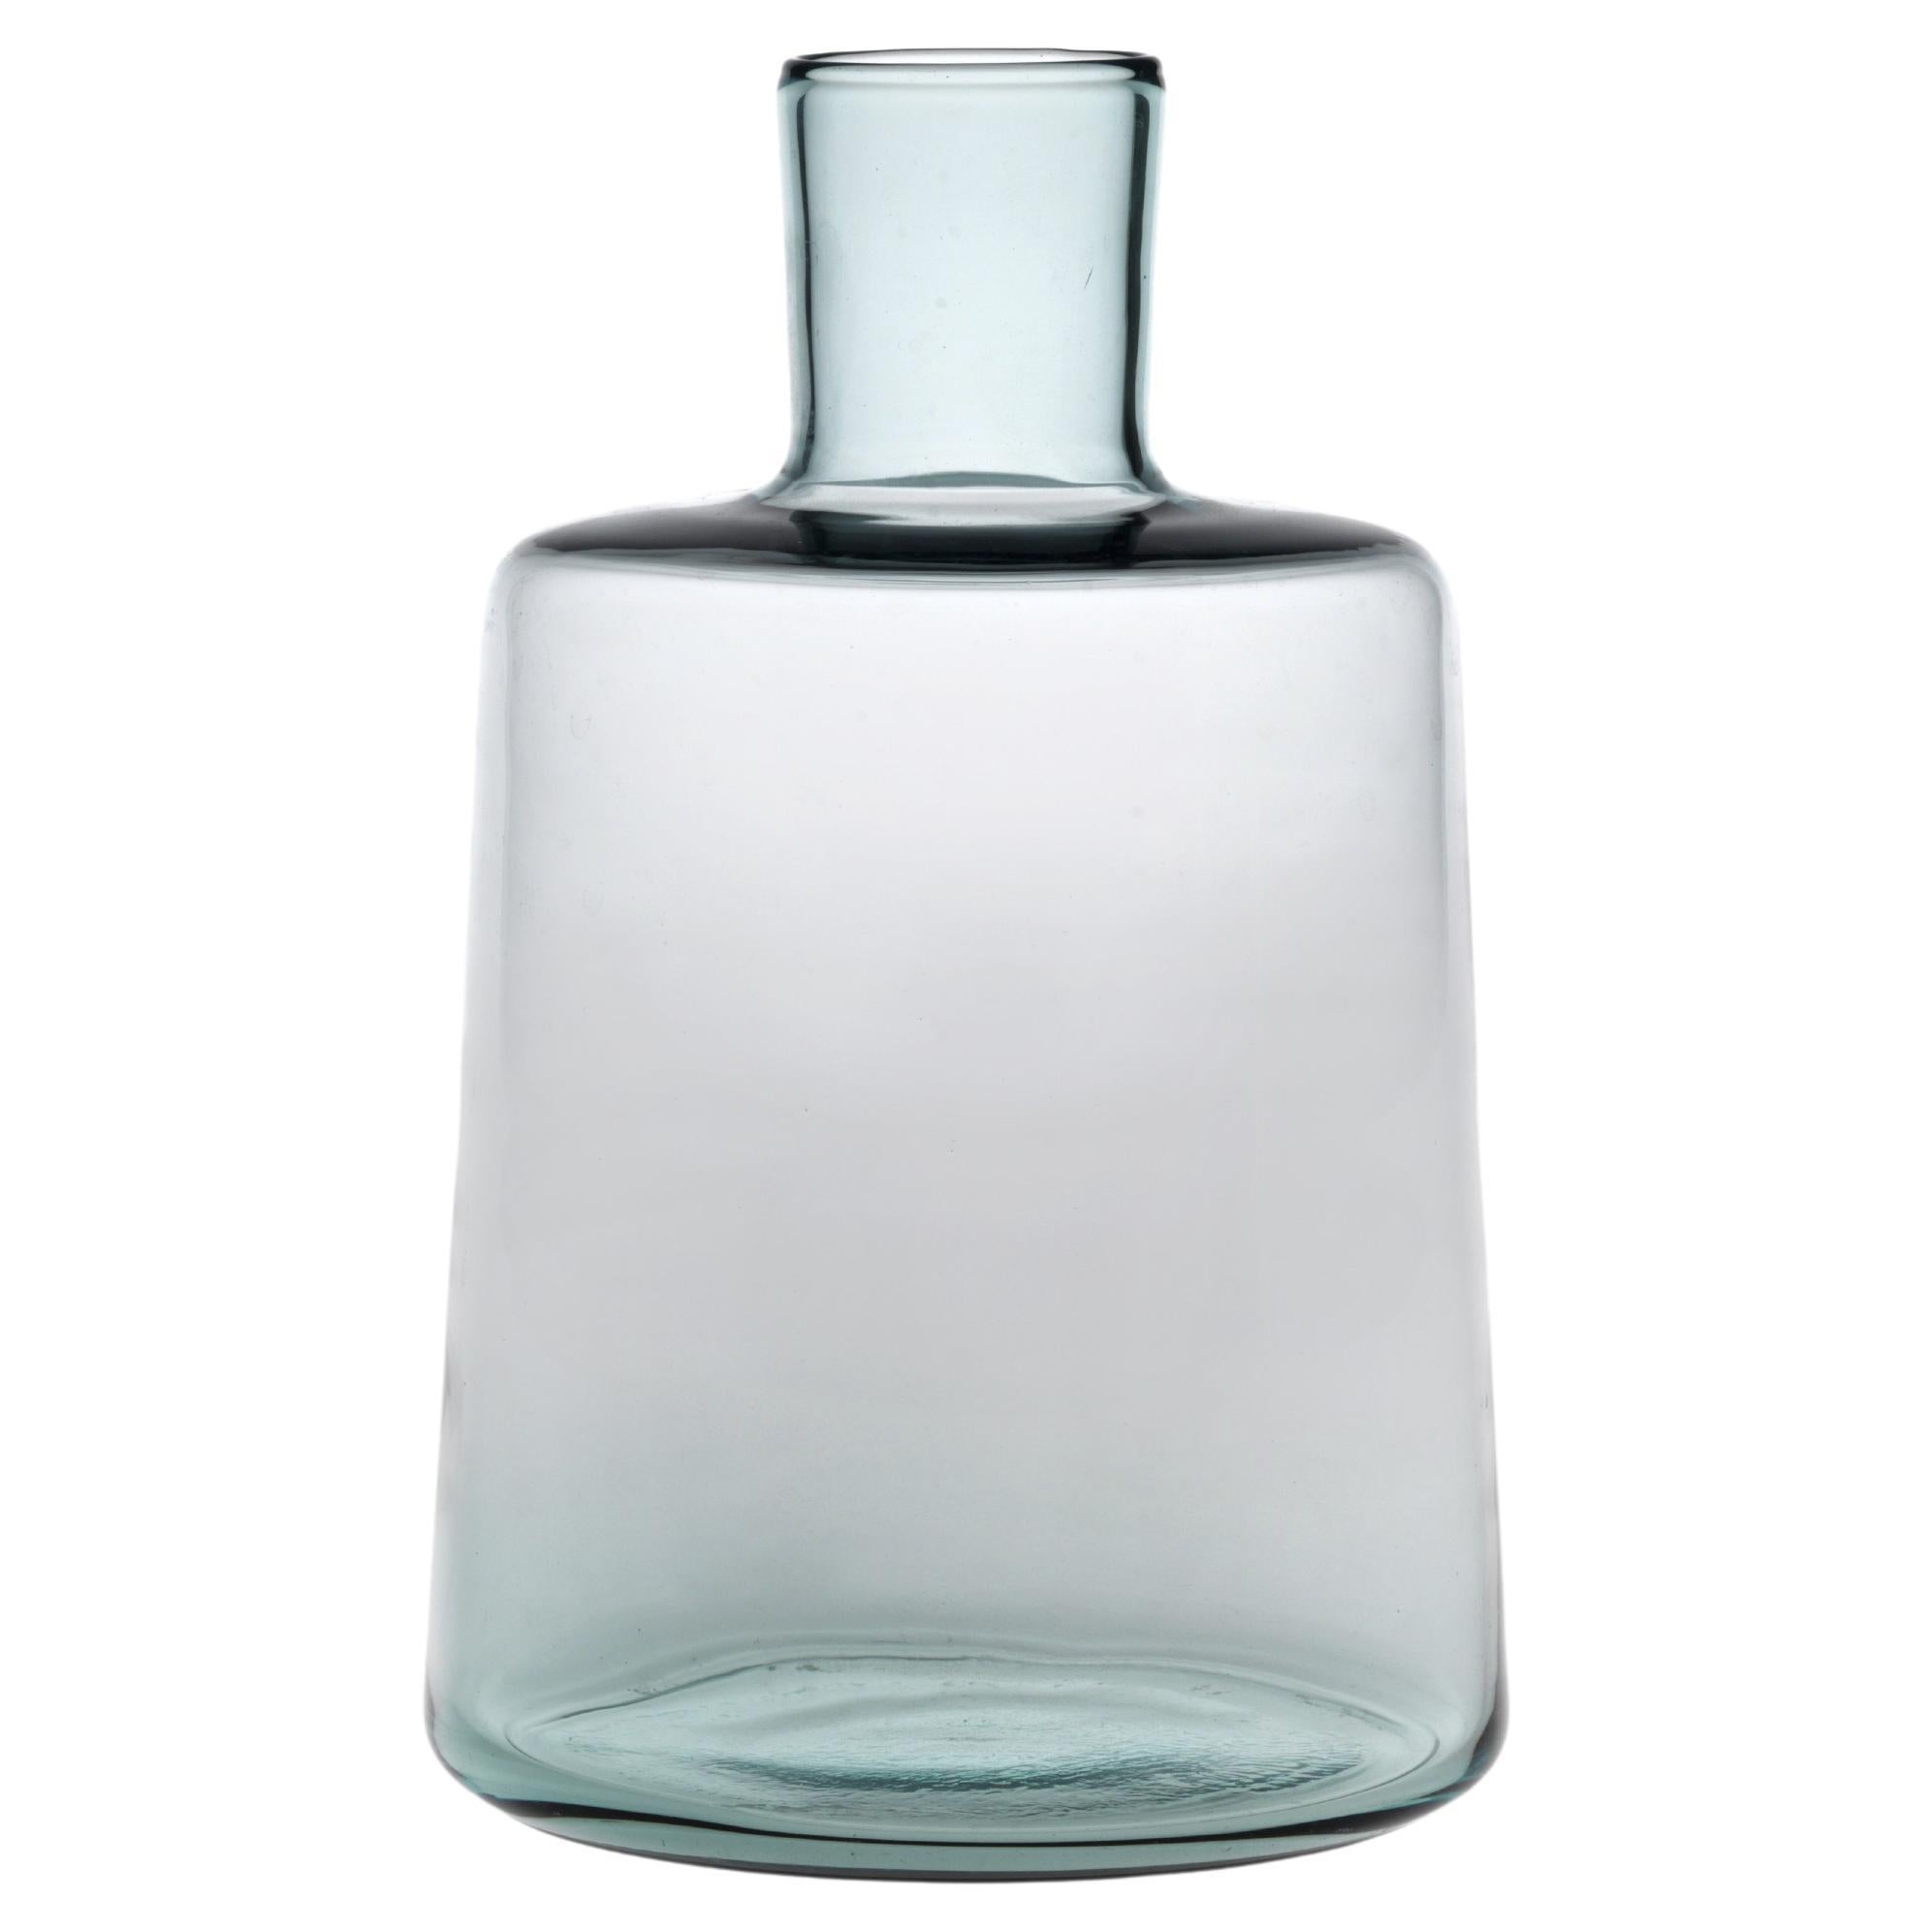 Bottle22, Bottle Glass Handcrafted Muranese Glass, Acquamarine Smooth MUN by VG